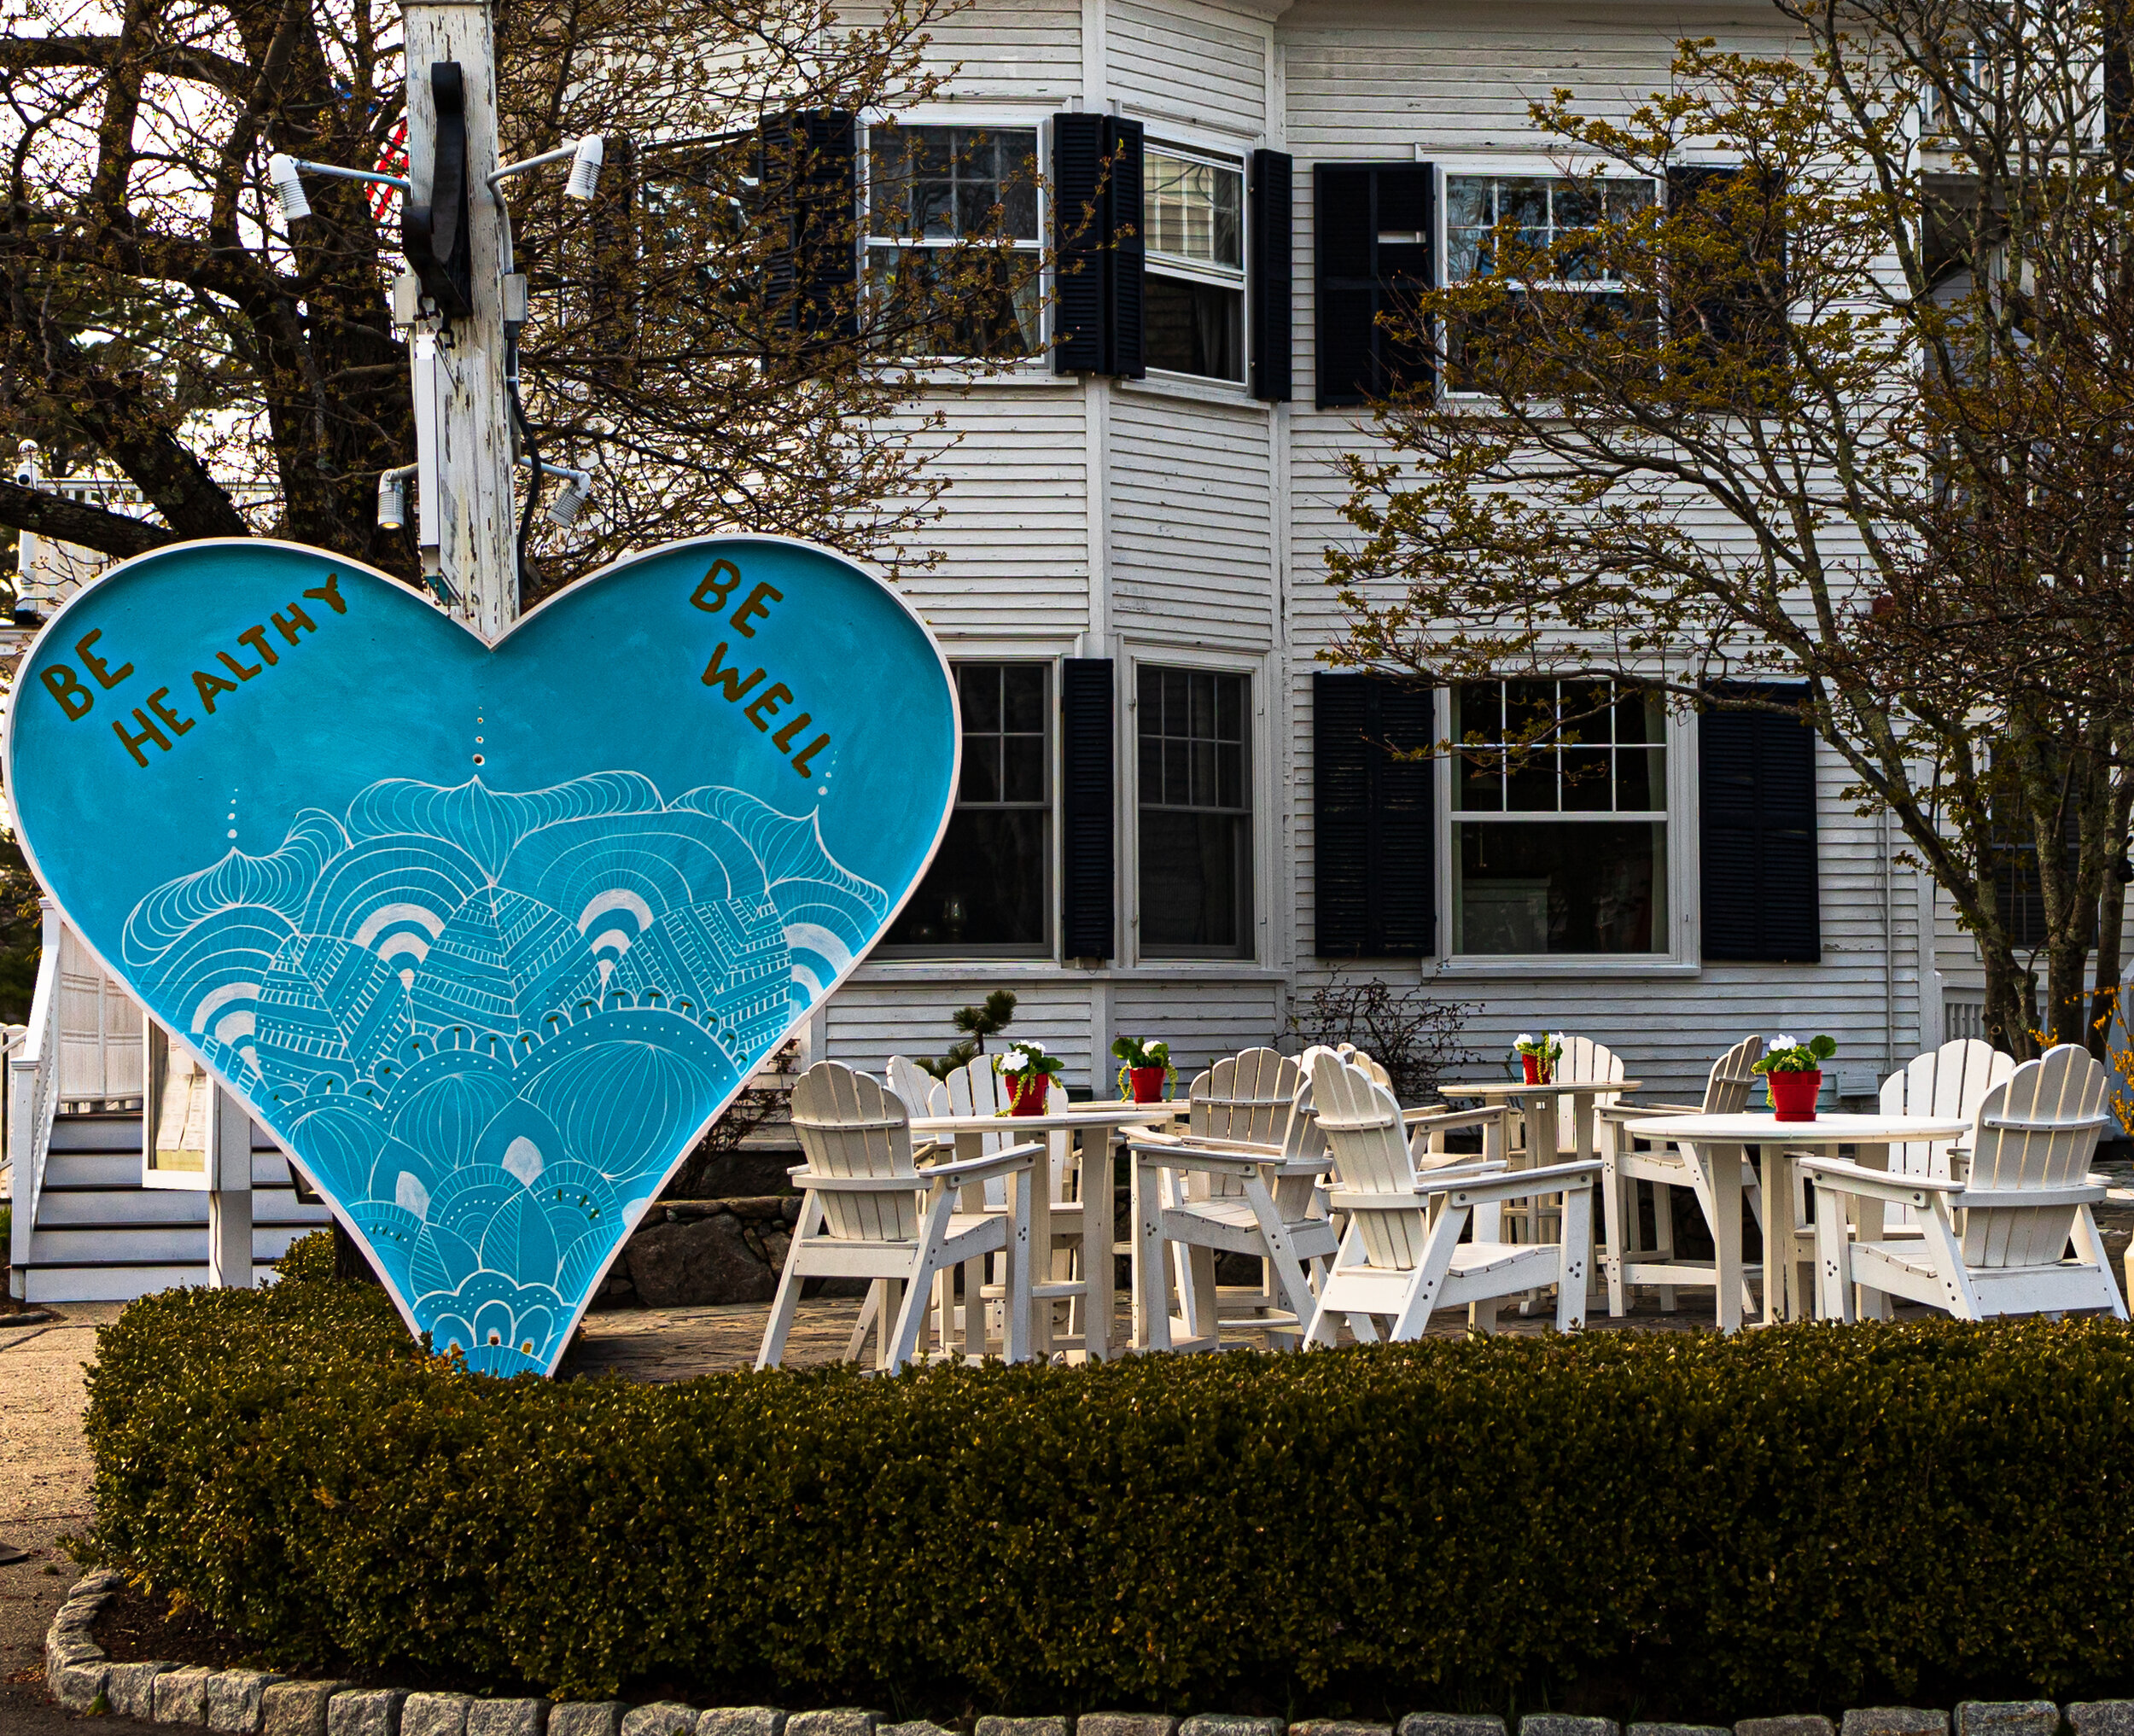 Tables Set for Diners Who Cannot Come, Kennebunkport, Maine-May 2020.jpg